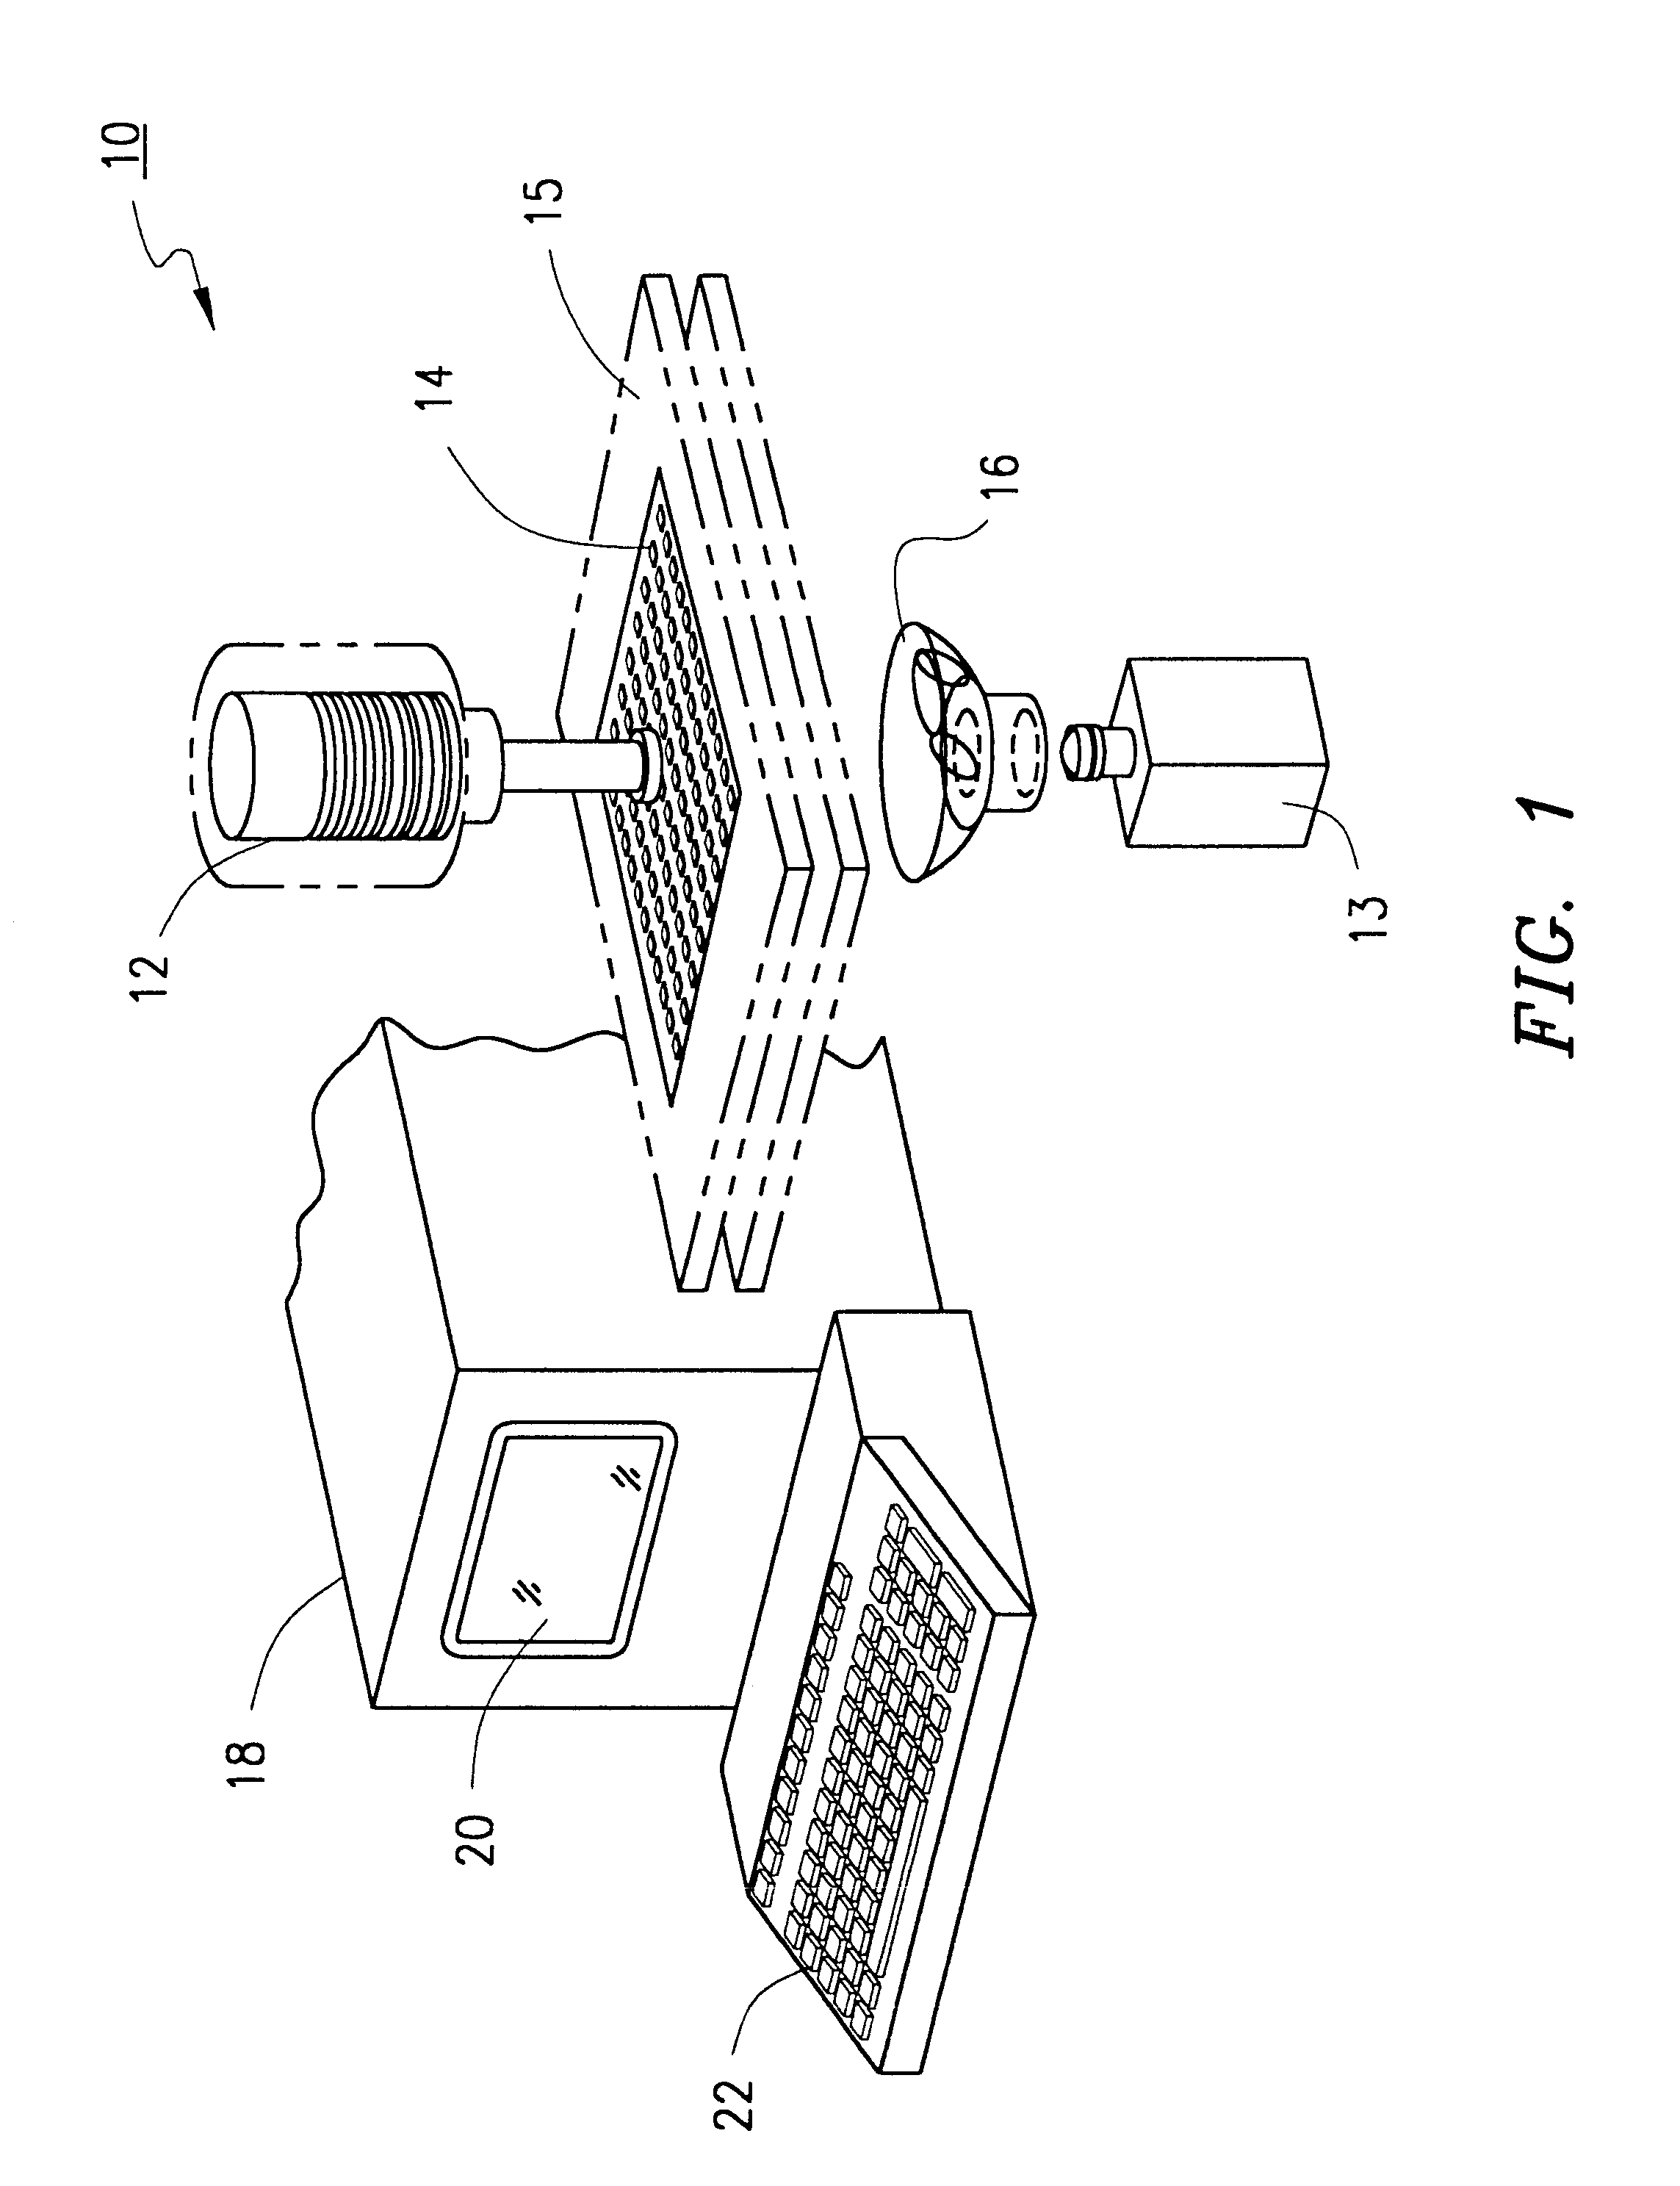 Method and apparatus for extracting measurement information and setting specifications using three dimensional visualization